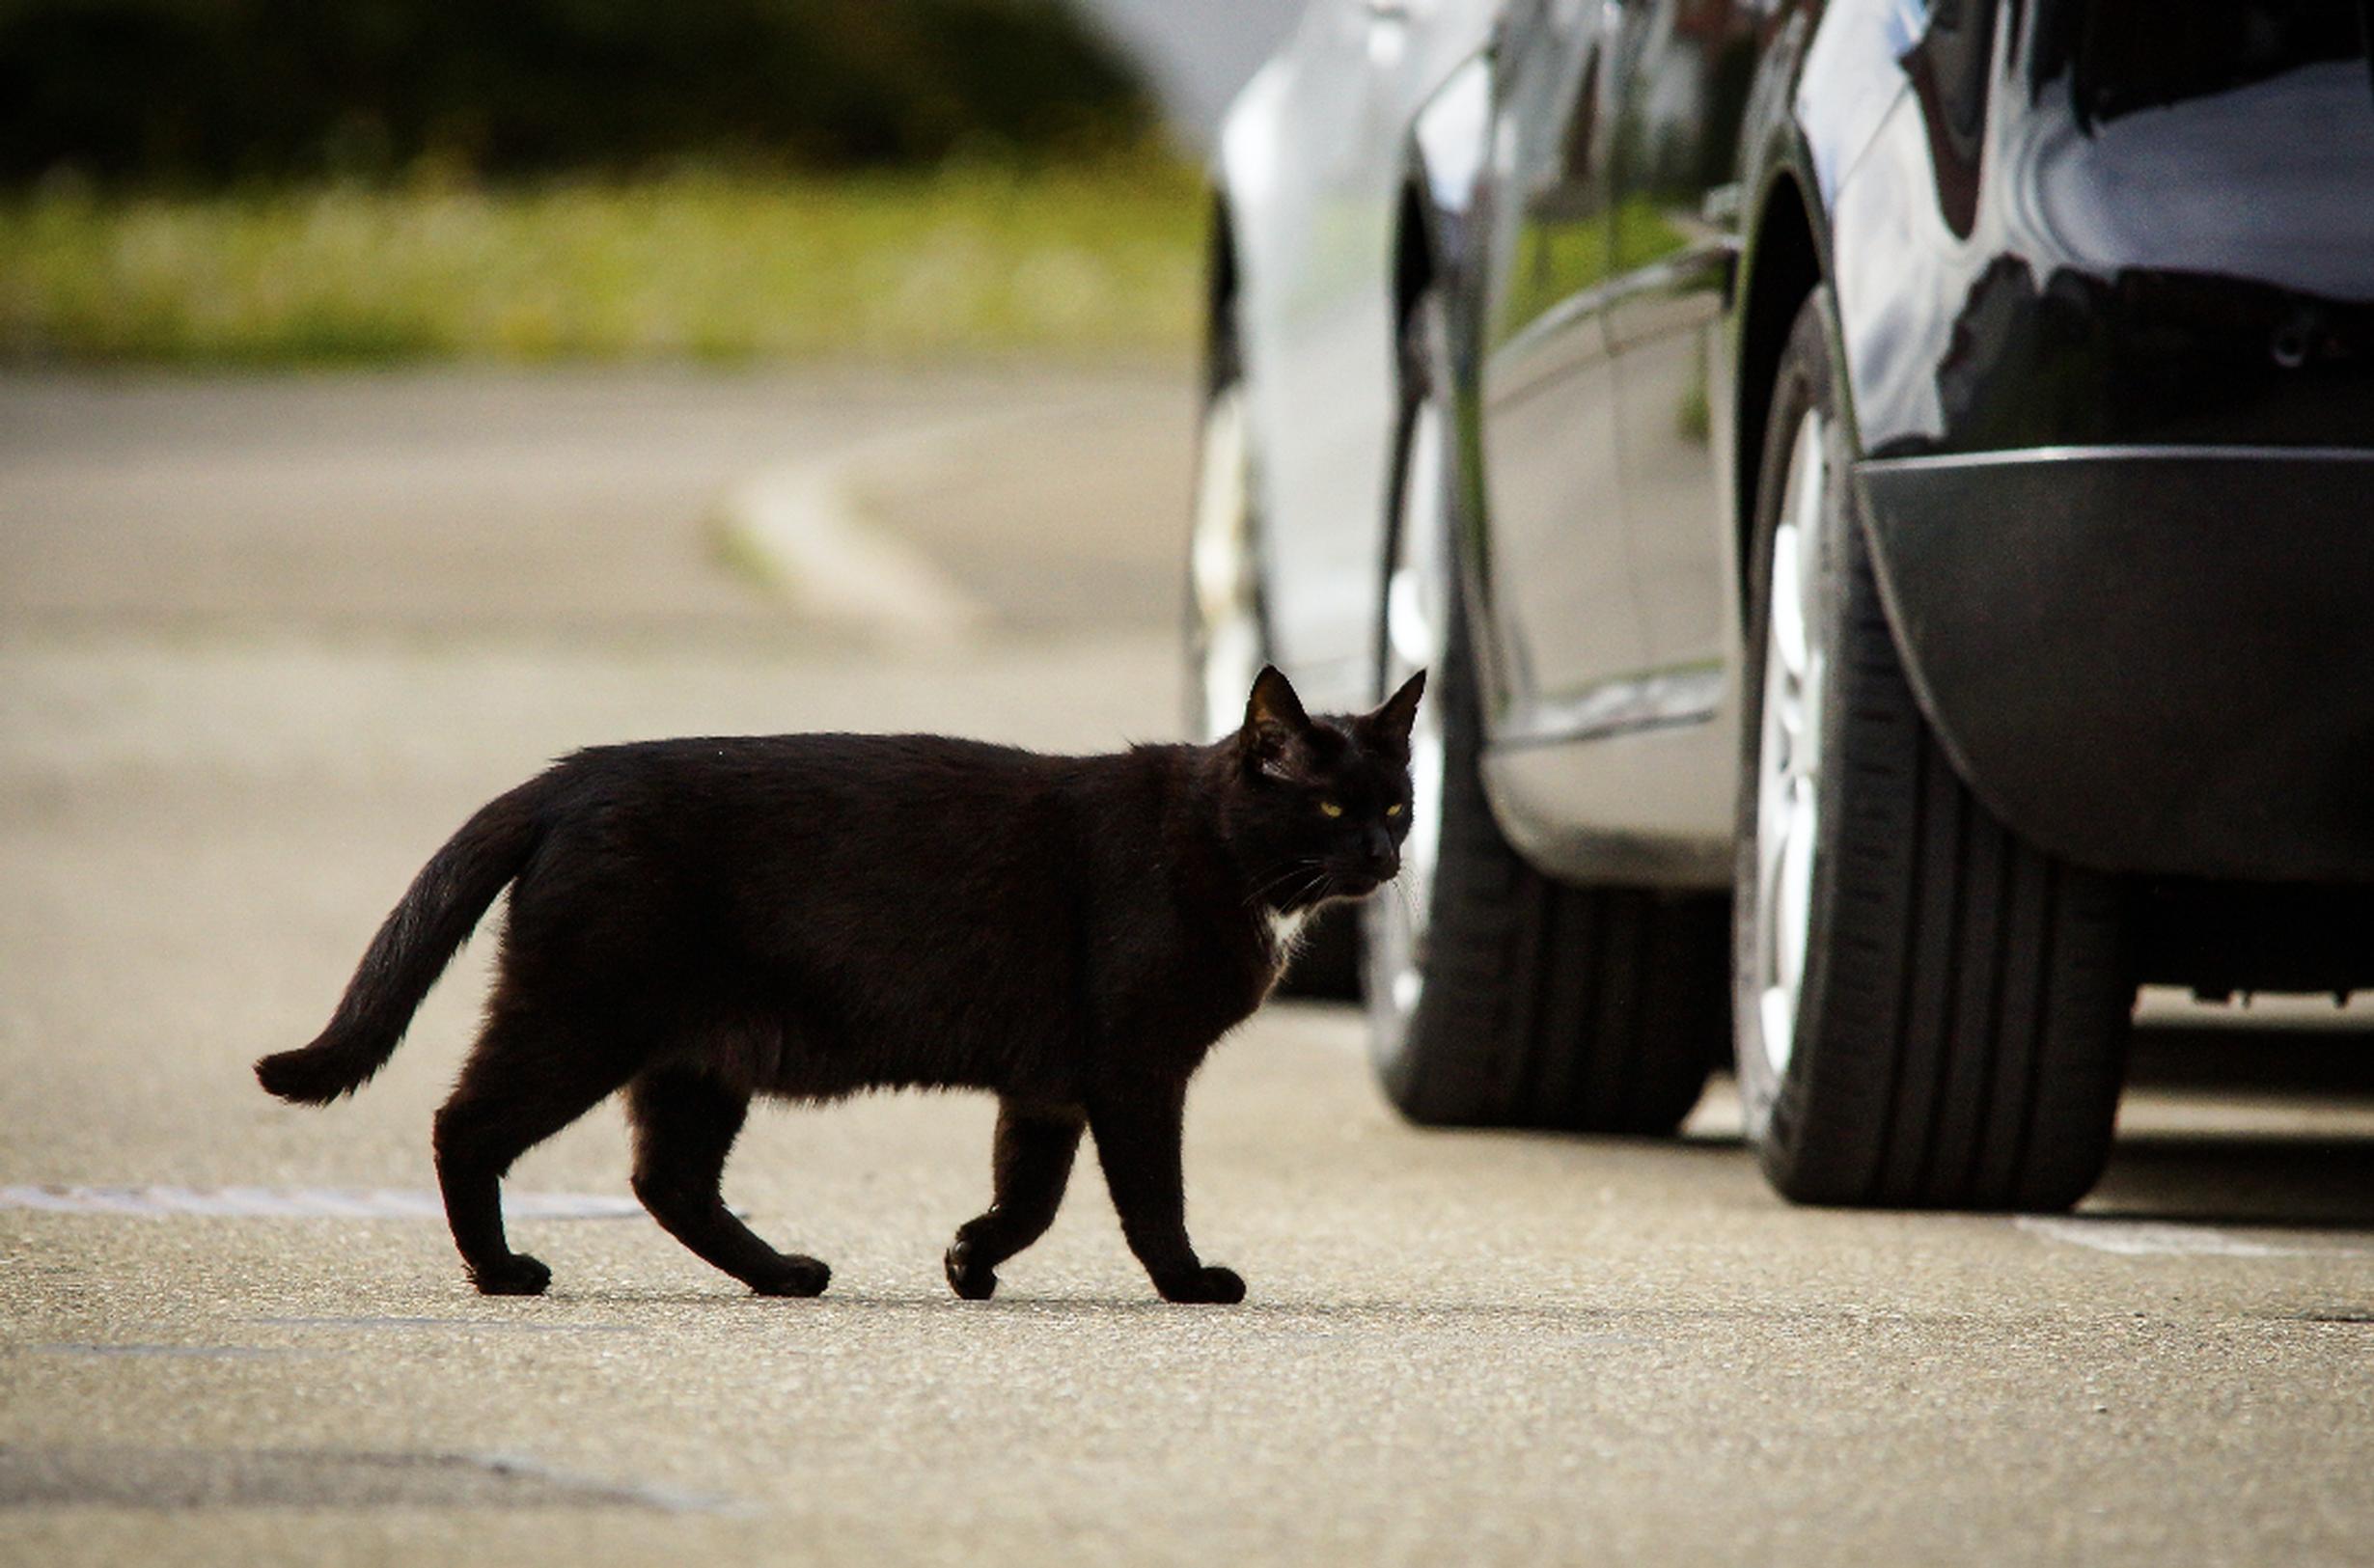 230,000 cats are hit by cars every year, that is an 630 every day